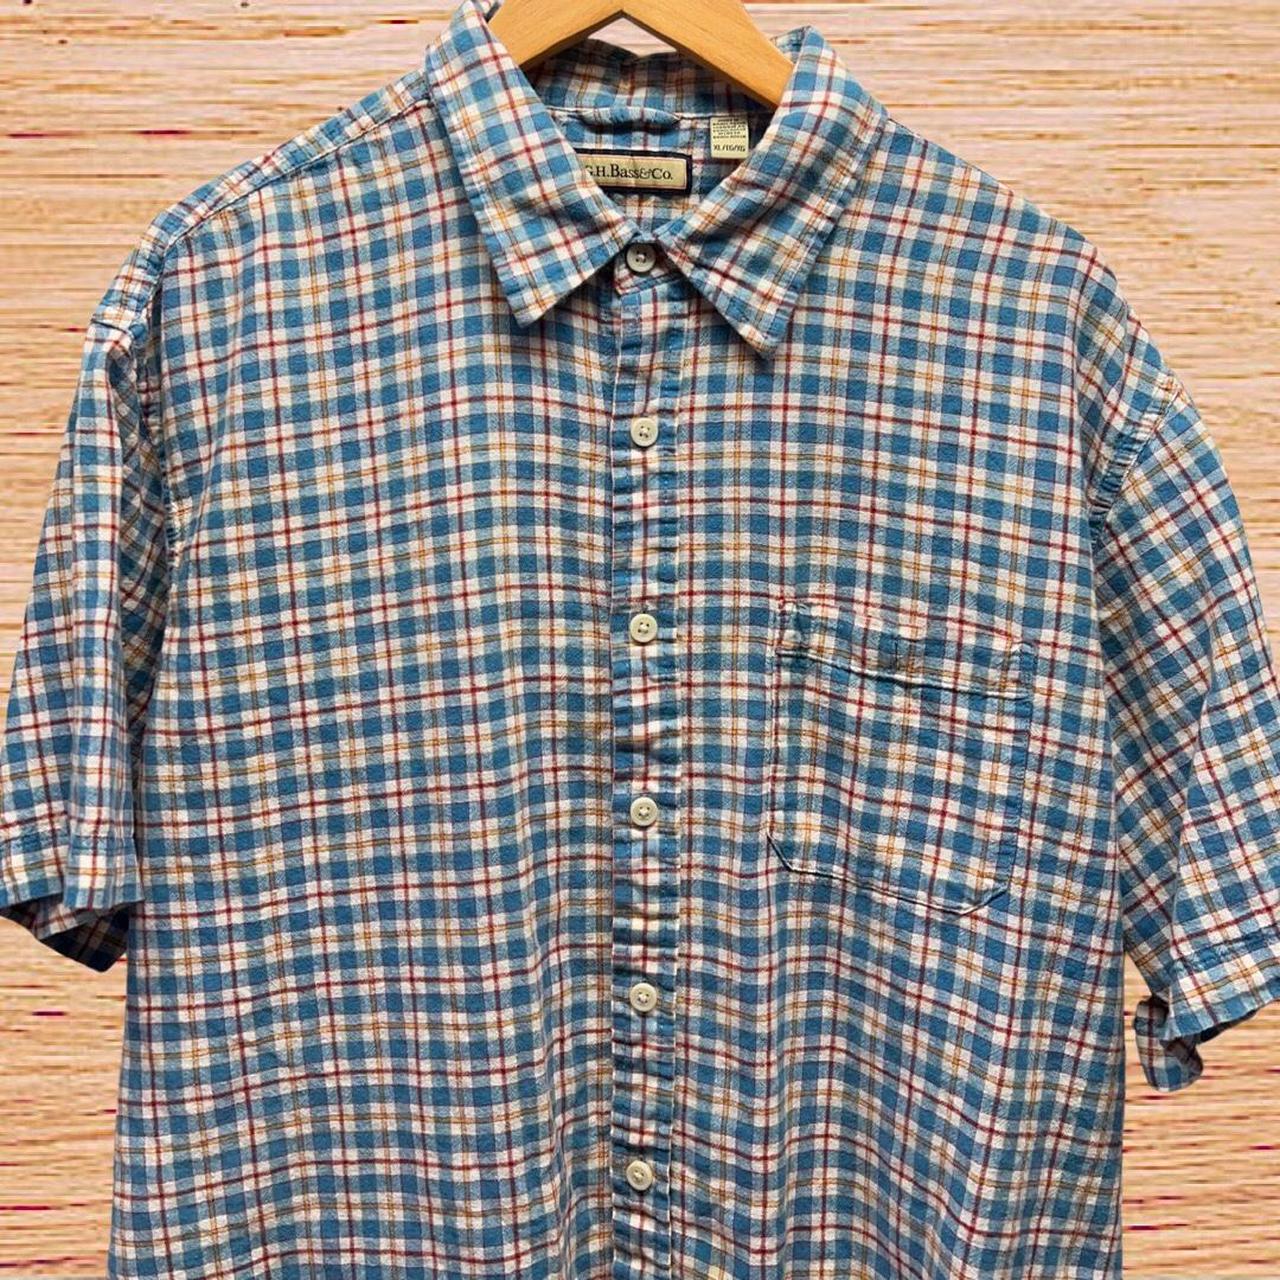 GH Bass & Co Button Up Shirt Mens Large Mulitcolor - Depop